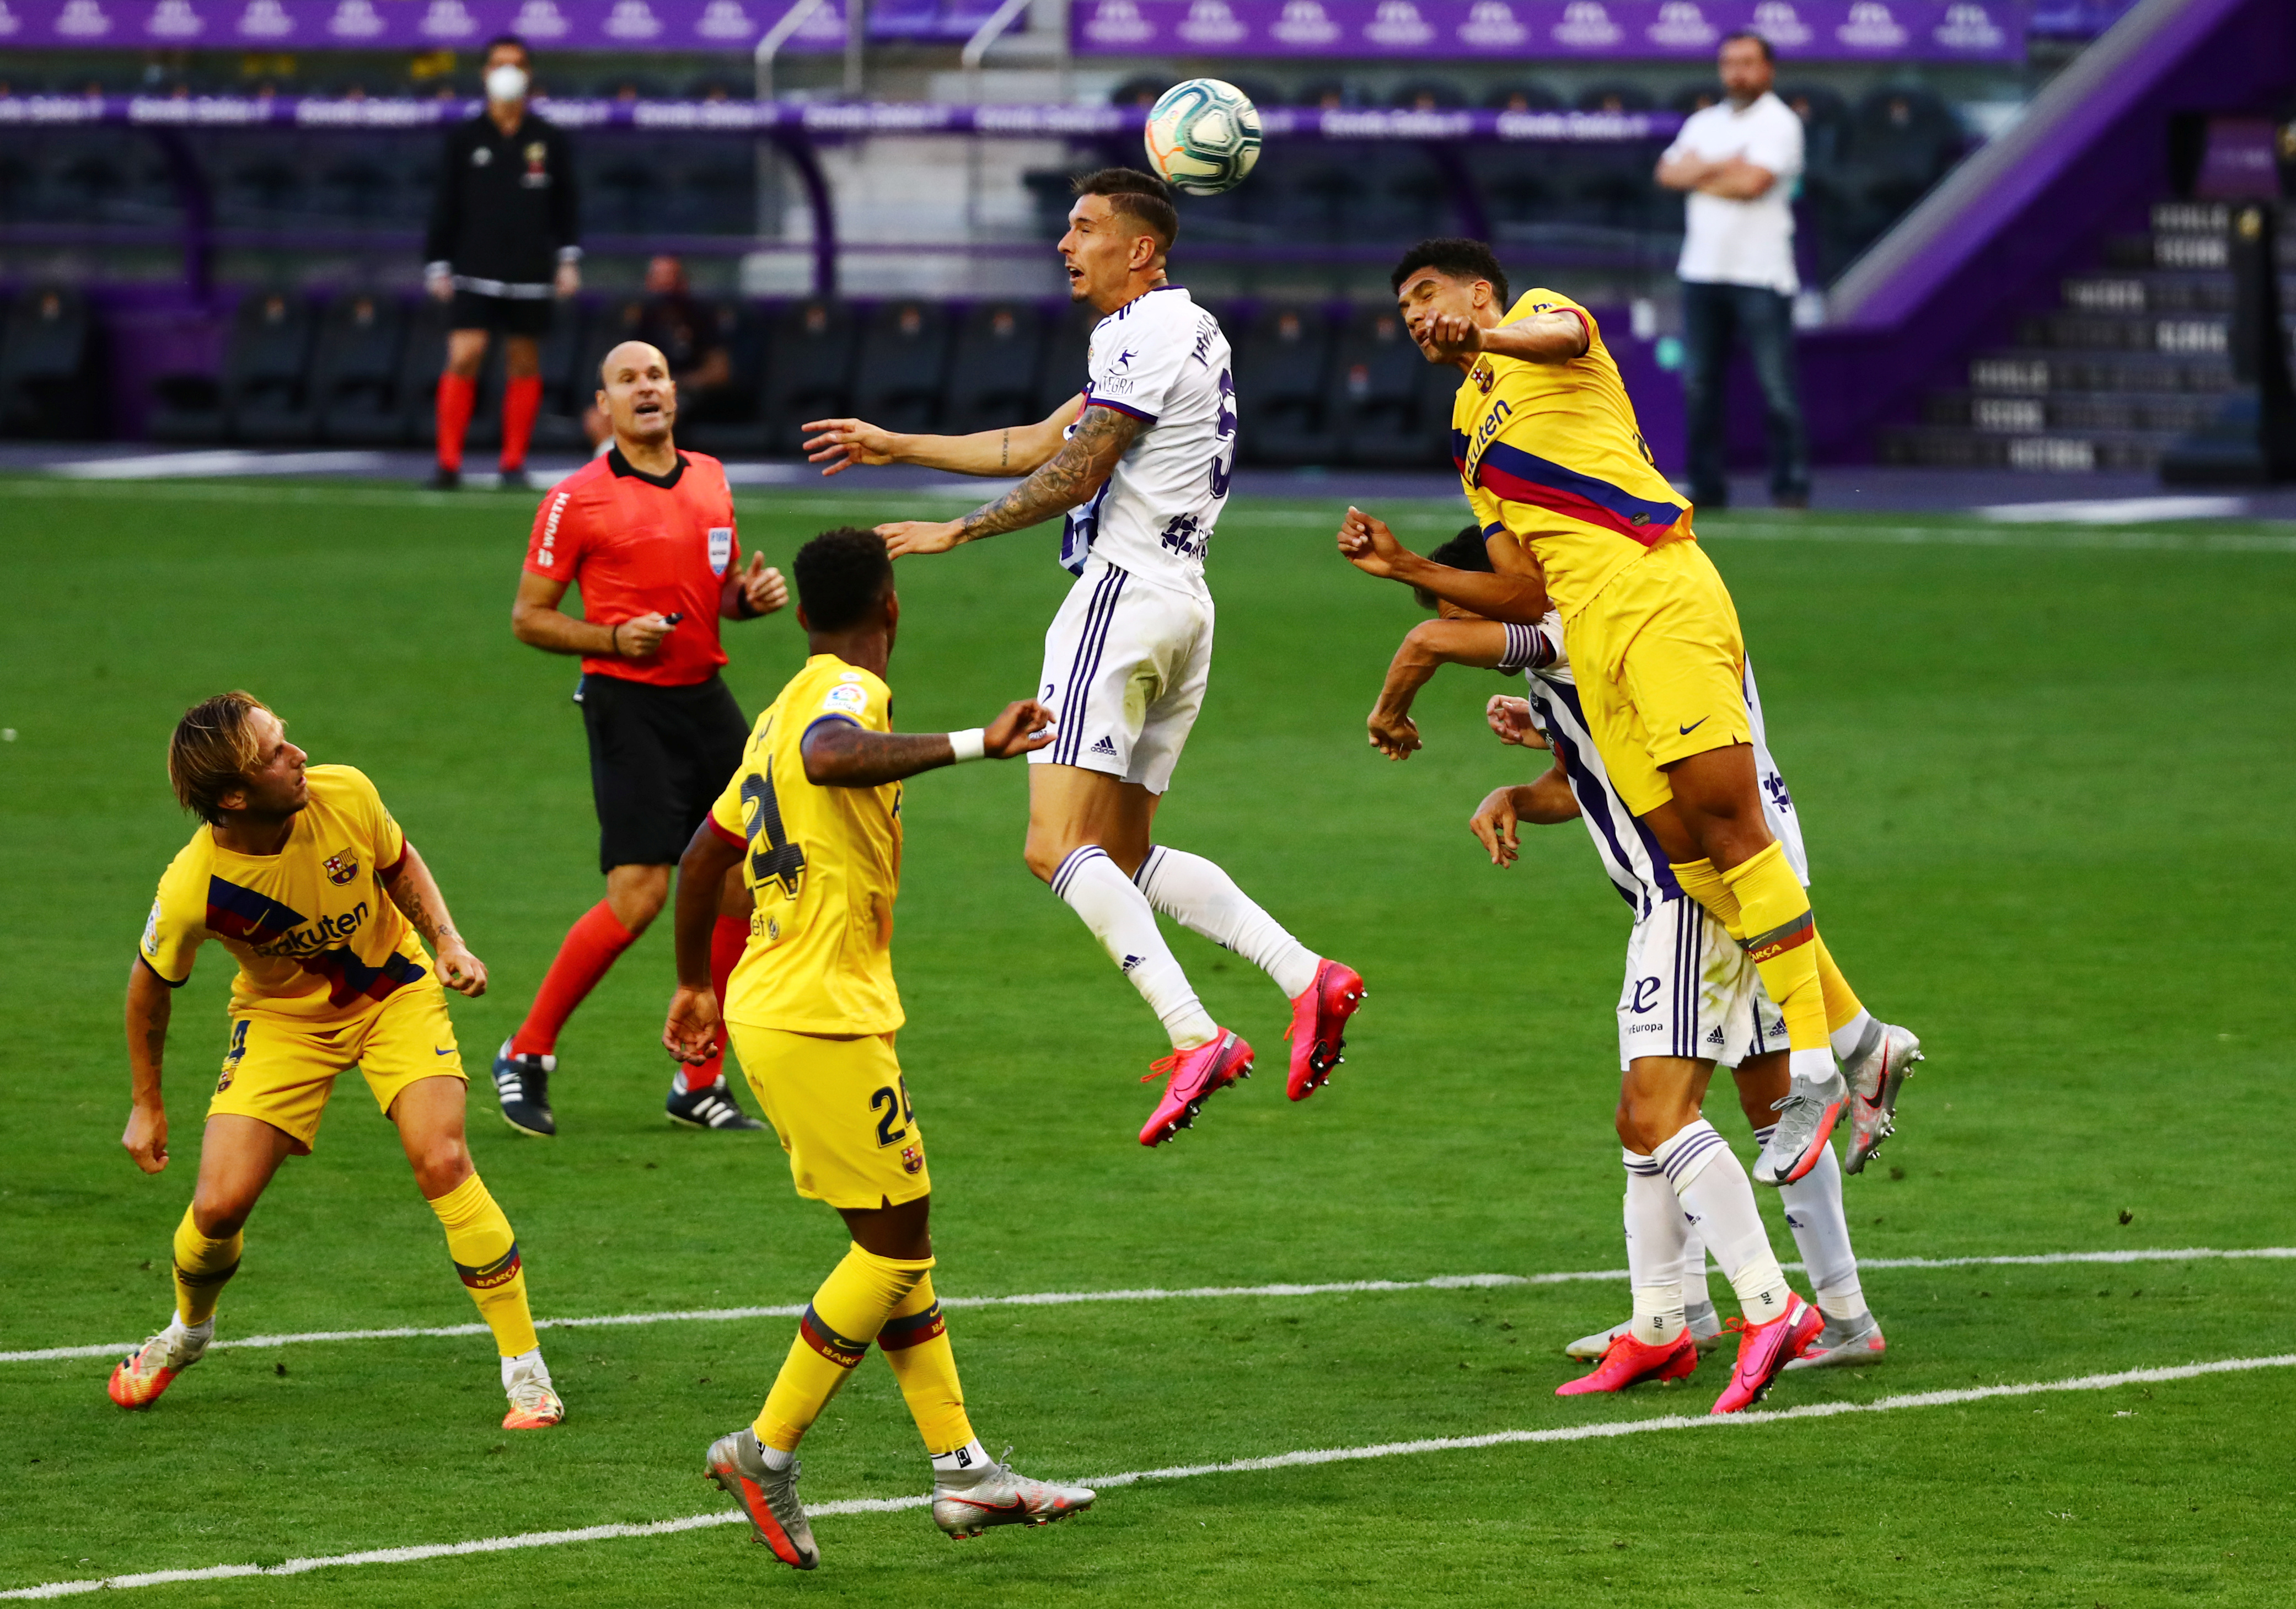  Real Valladolid's Javi Sanchez in action with Barcelona's Ronald Araujo, as play resumes behind closed doors following the outbreak of the coronavirus disease (COVID-19)during the La Liga Santander between Real Valladolid and FC Barcelona, at Estadio Jose Zorrilla, in Valladolid, Spain, on July 11, 2020. Photo: Reuters